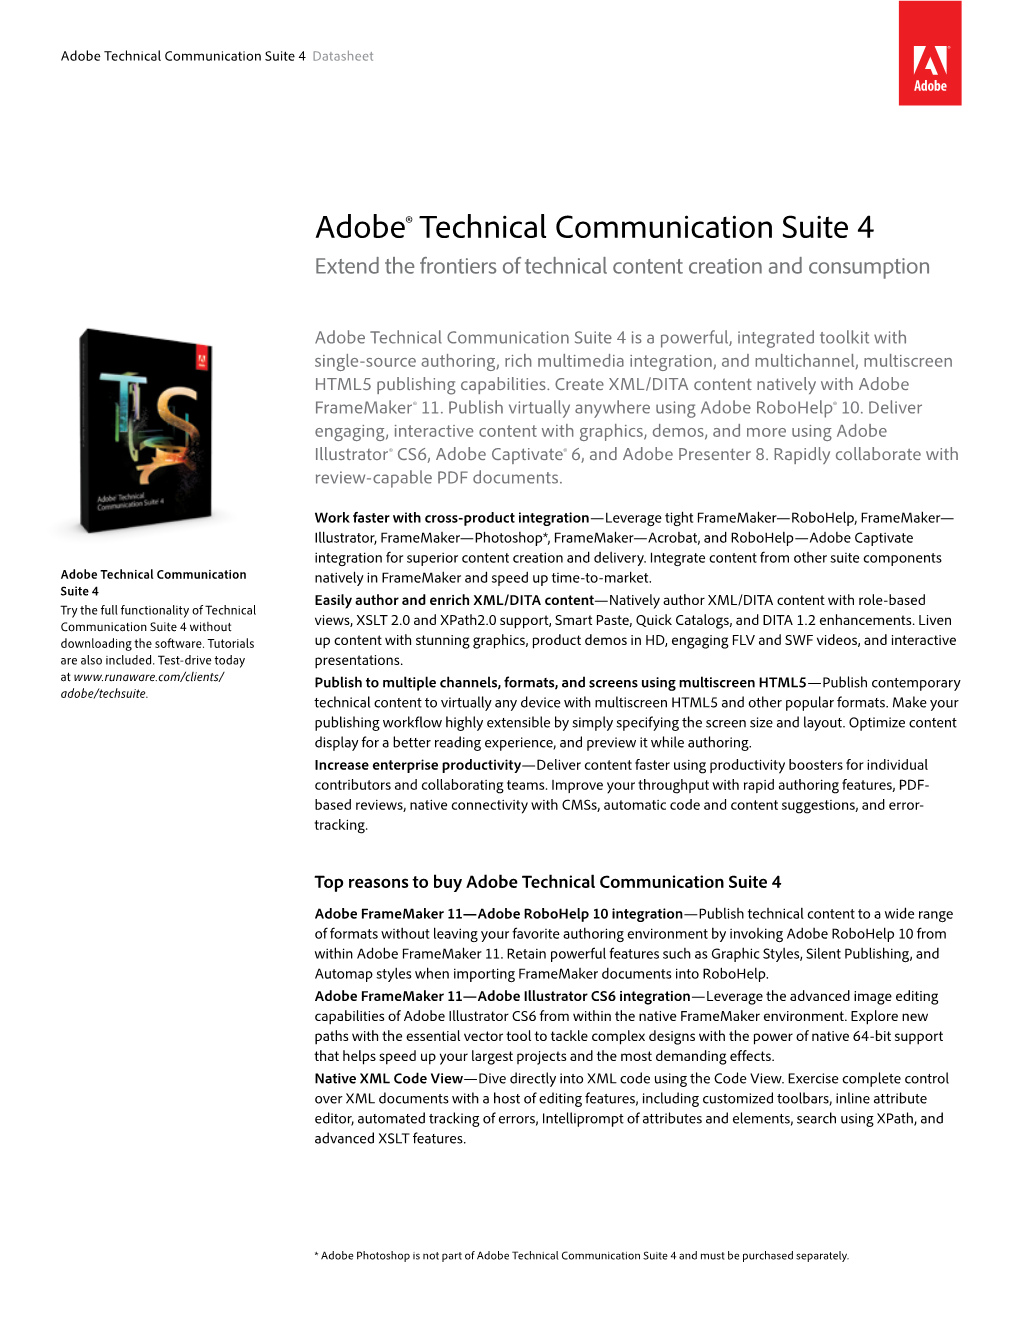 Adobe® Technical Communication Suite 4 Extend the Frontiers of Technical Content Creation and Consumption